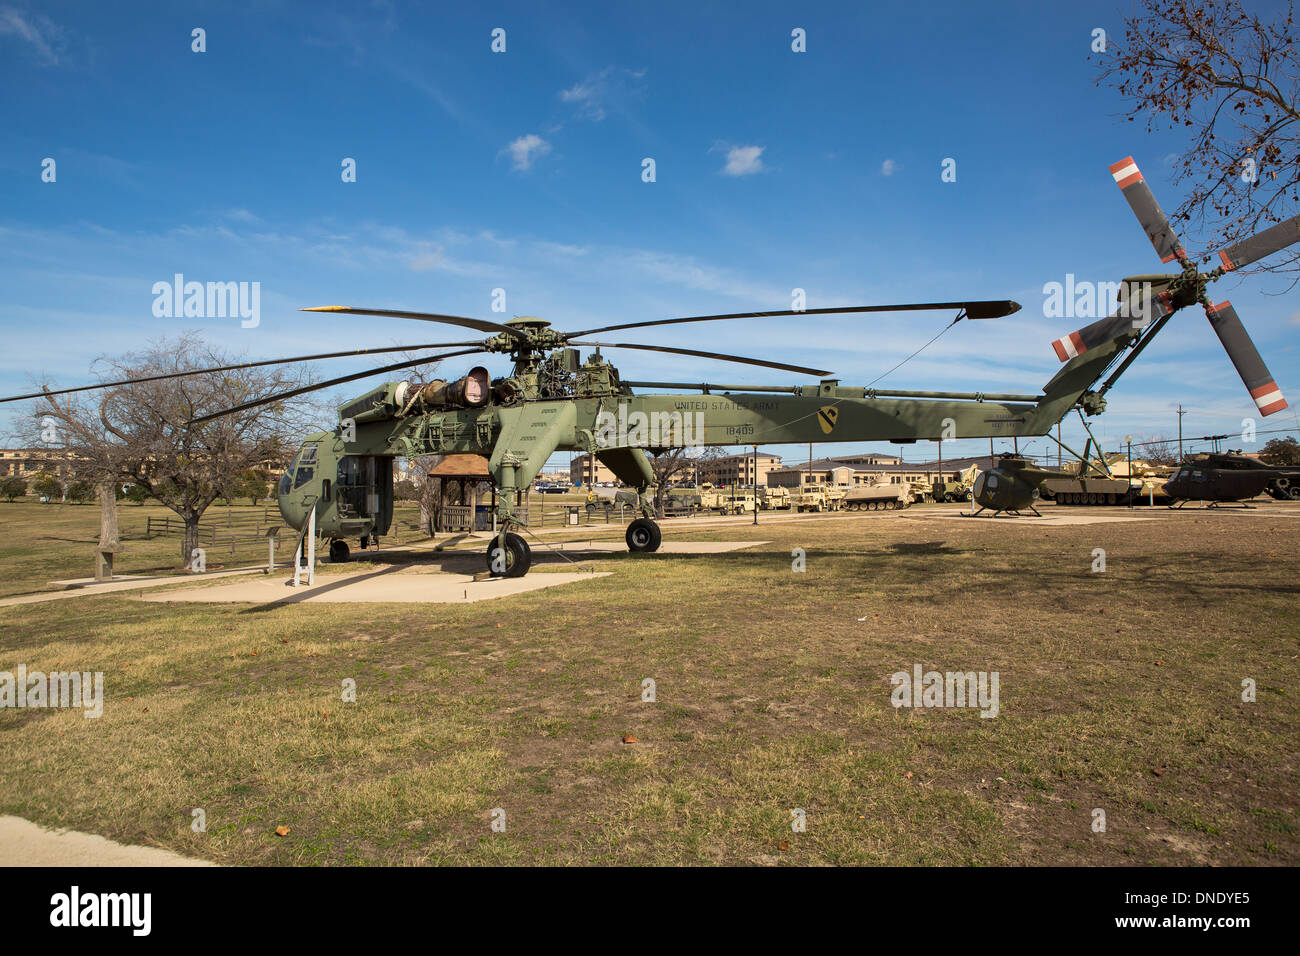 1st Cavalry Division Museum, Ft Hood, Texas Stock Photo, Royalty Free Image: 64845821 ...